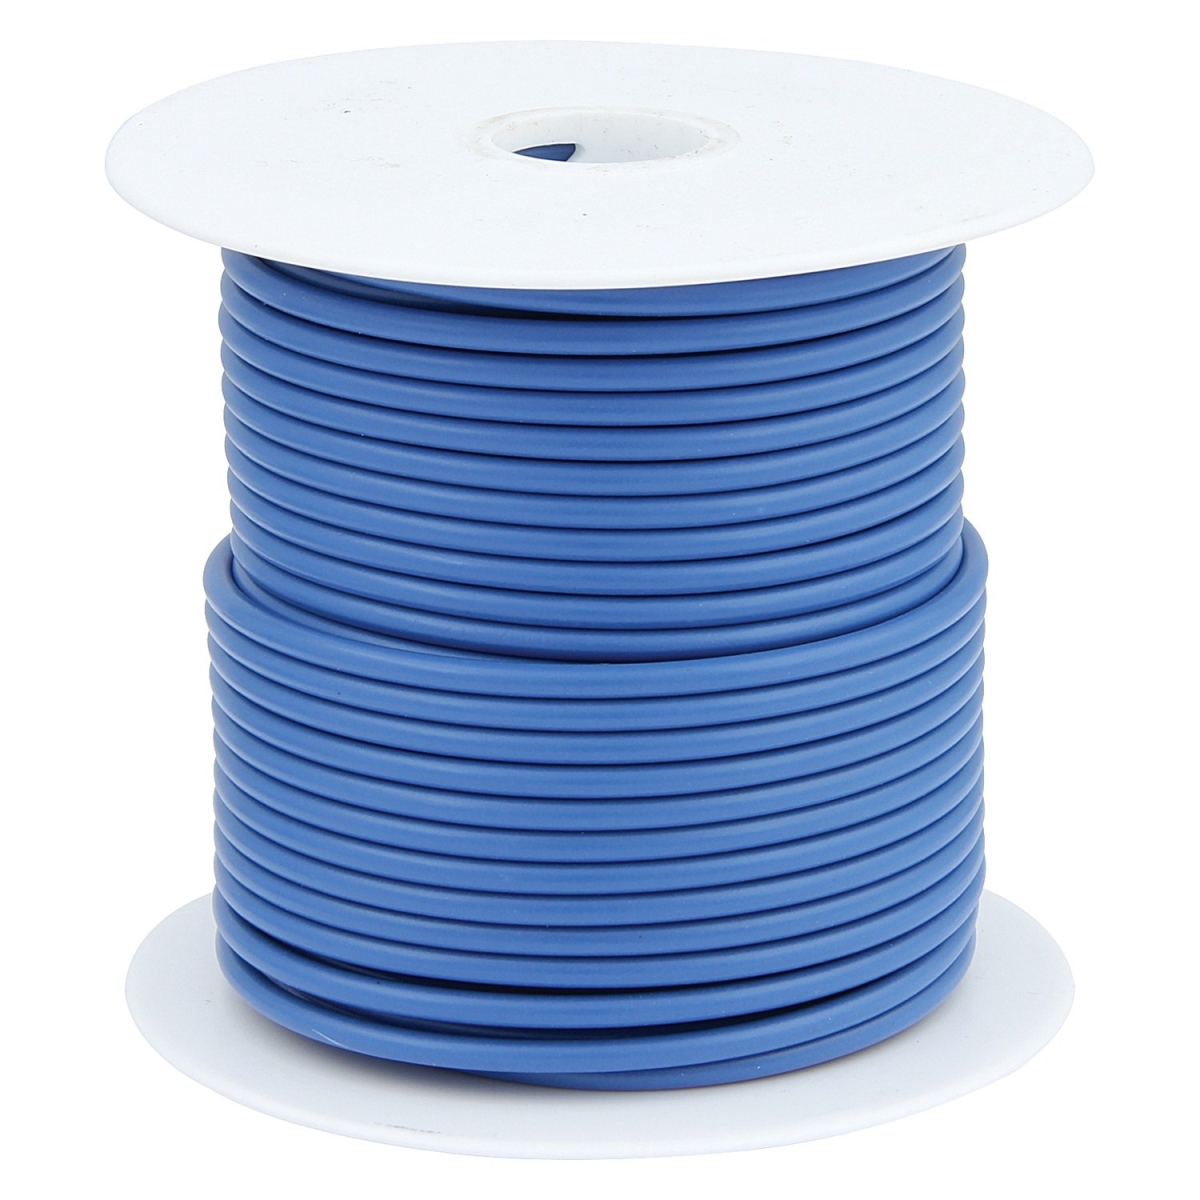 All76556 100 Ft. 14 Awg Blue Primary Wire